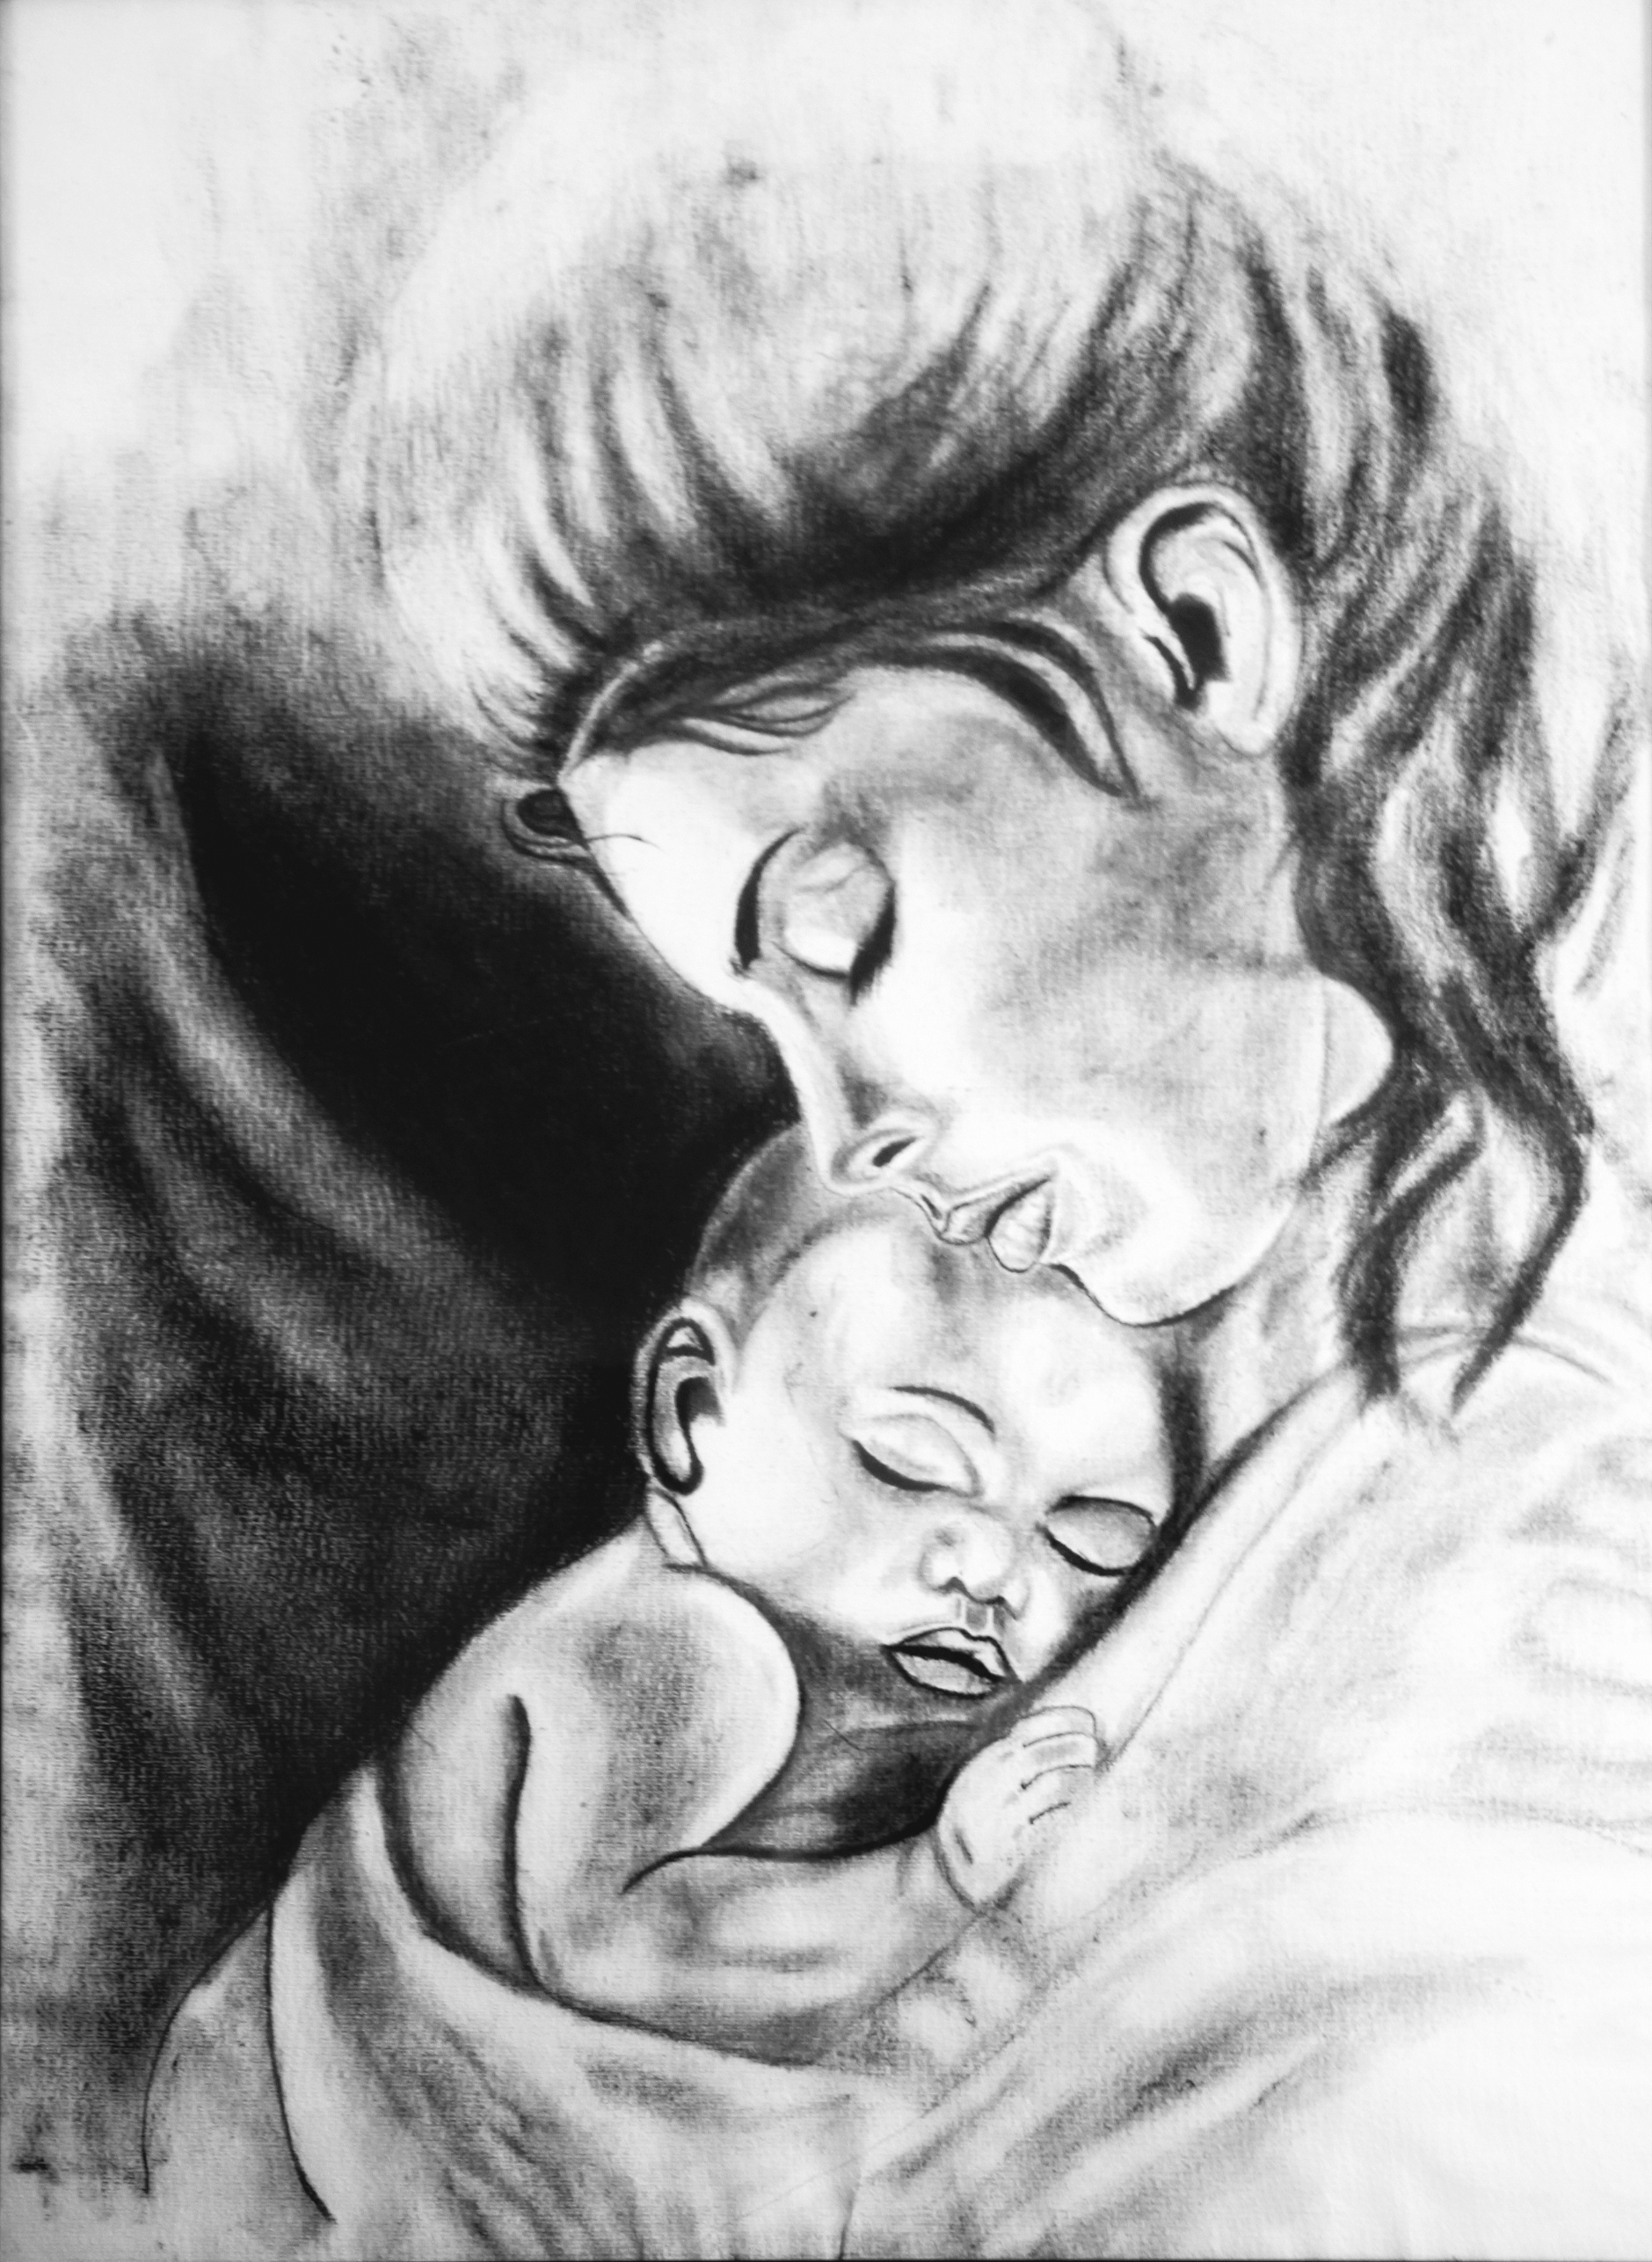 Free Mother And Child Drawing Download Free Clip Art Free Clip Art On Clipart Library Download mother and baby stock vectors. free mother and child drawing download free clip art free clip art on clipart library